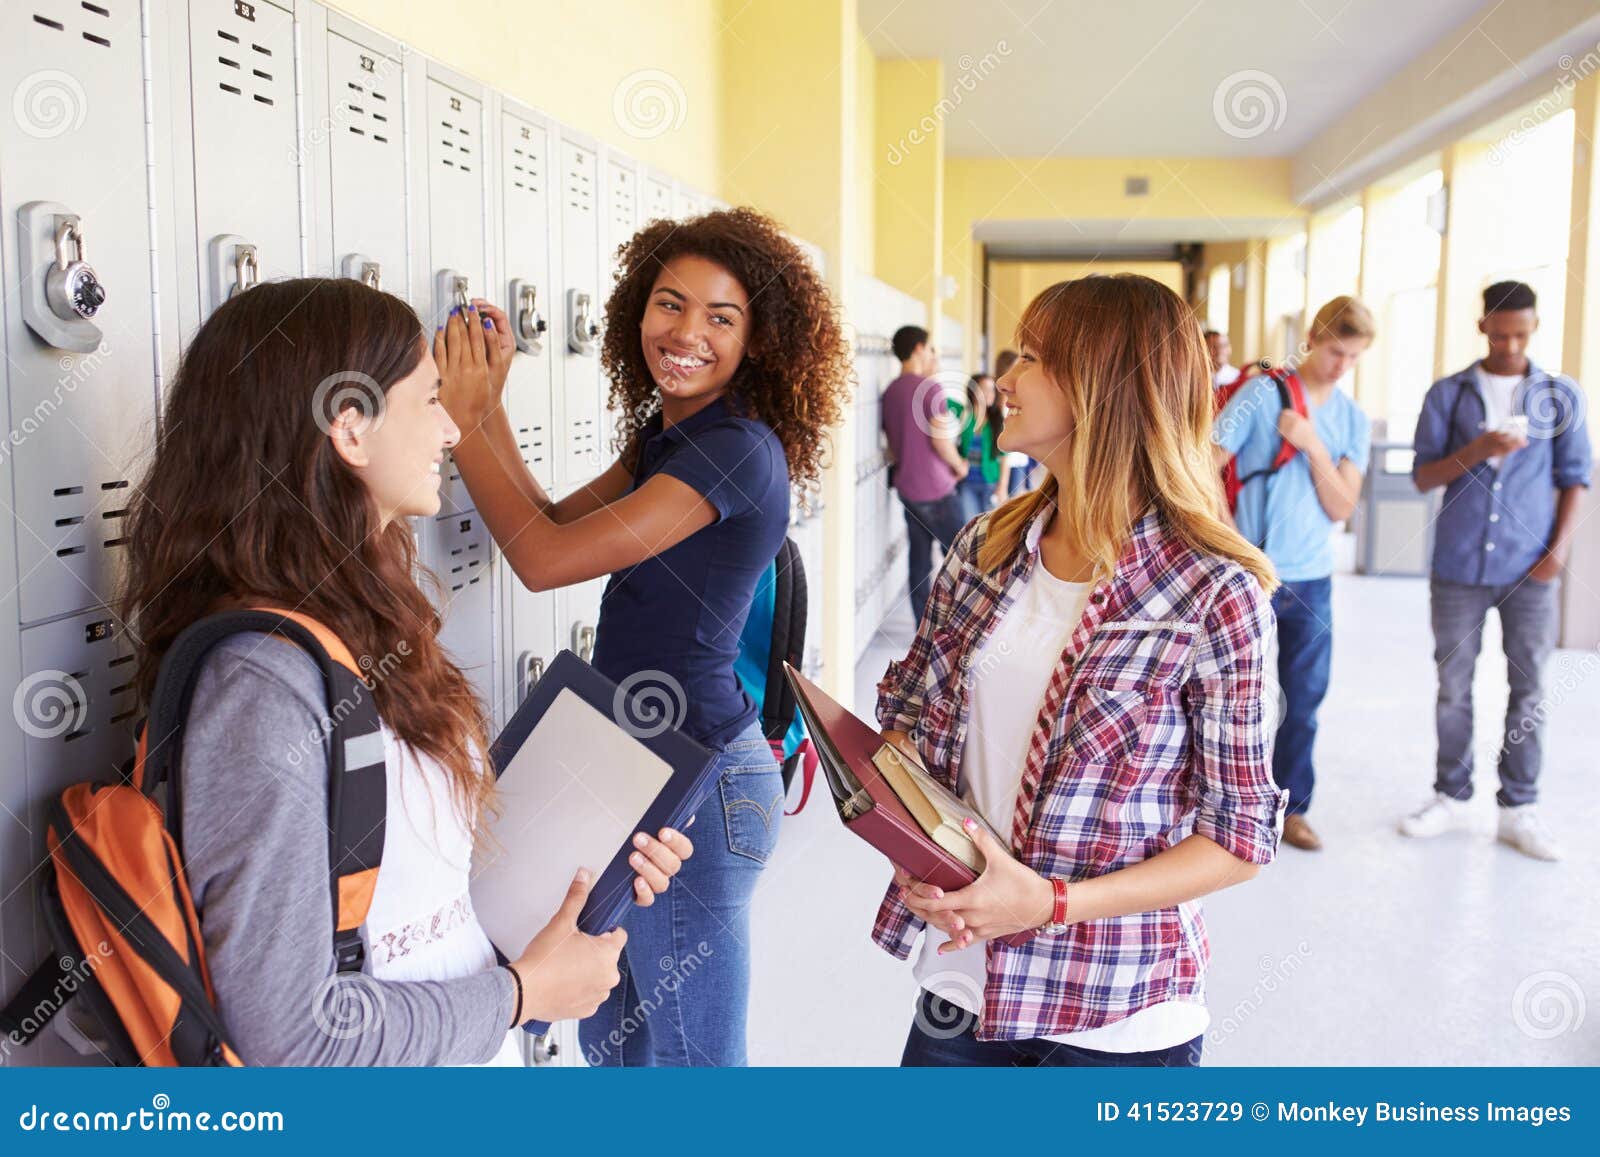 group of female high school students talking by lockers